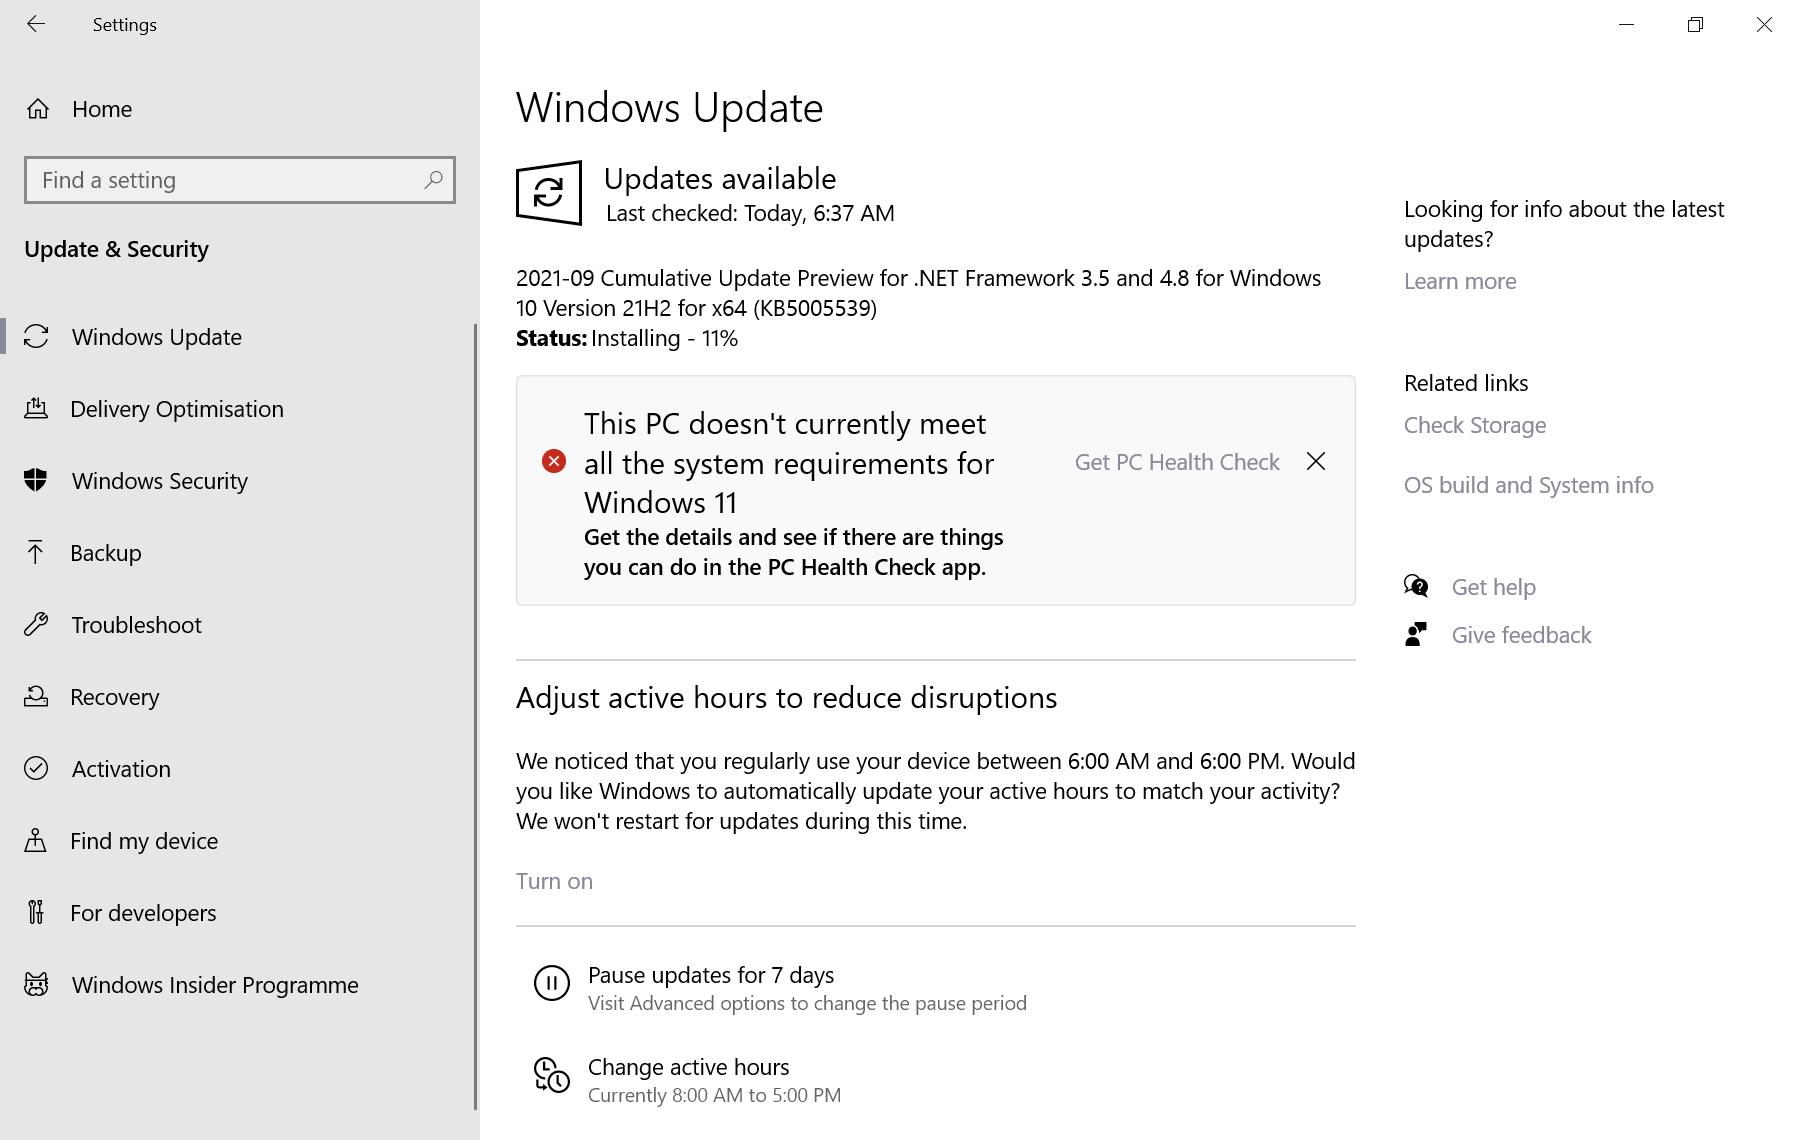 Is Windows 11 Free? this-pc-doesnt-currently-meet-all-the-system-requirements-for-windows-11.png